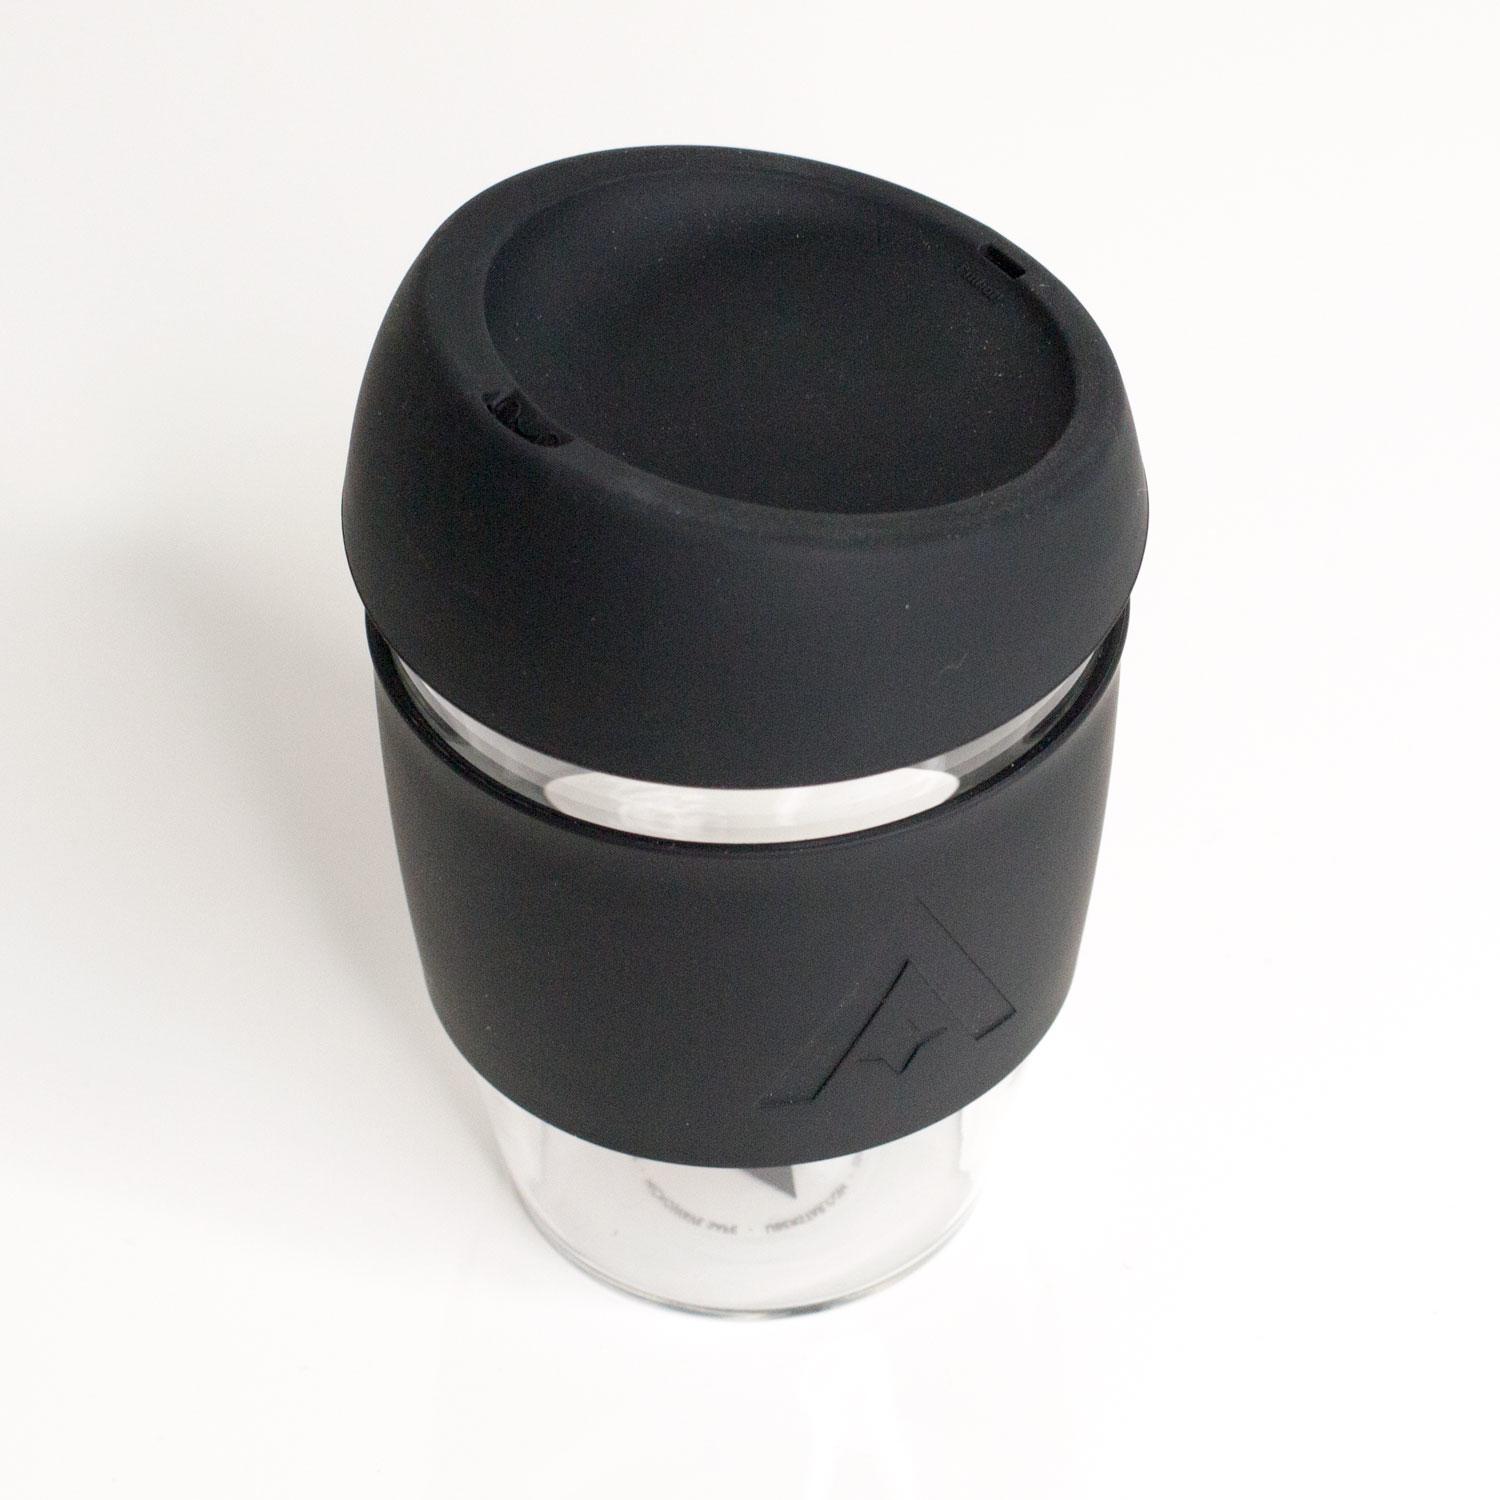 Uberstar Reusable Glass Travel Cup - Black - Only £14.99